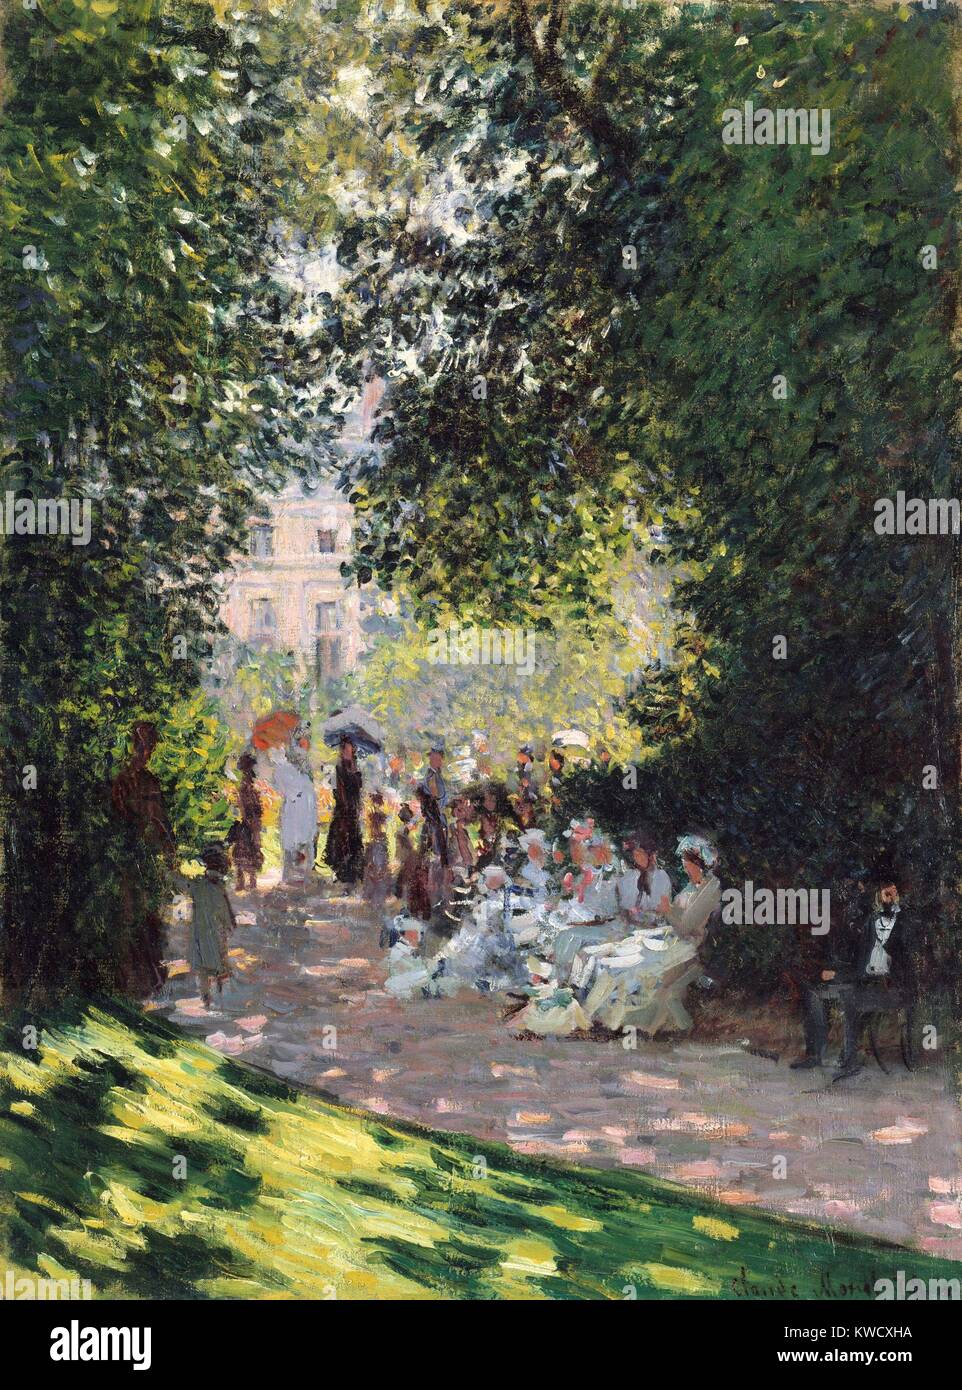 The Parc Monceau, by Claude Monet, 1878, French impressionist painting, oil on canvas. Monet applied the paint in small daubs over the entire canvas that reduced the illusion of the volumes and space of his motif (BSLOC 2017 3 27) Stock Photo